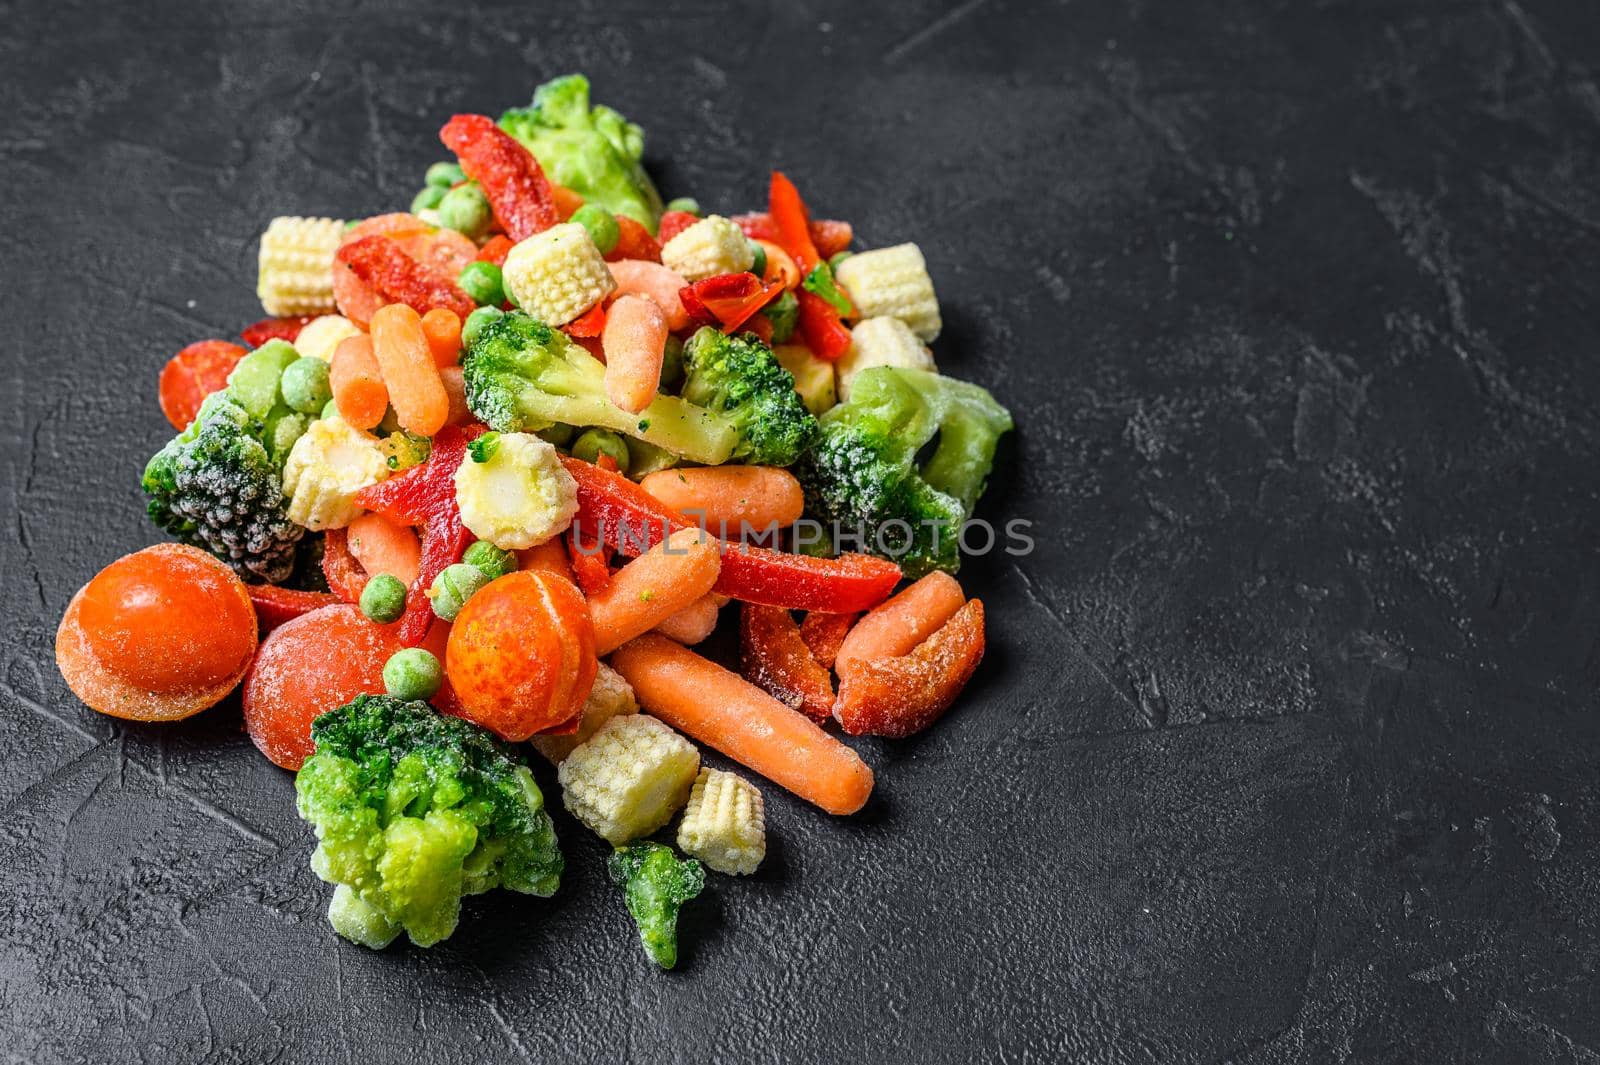 Frozen cold sliced Vegetables, broccoli, sweet peppers, tomatoes, carrots, peas and corn. Black background. top view. Copy space by Composter